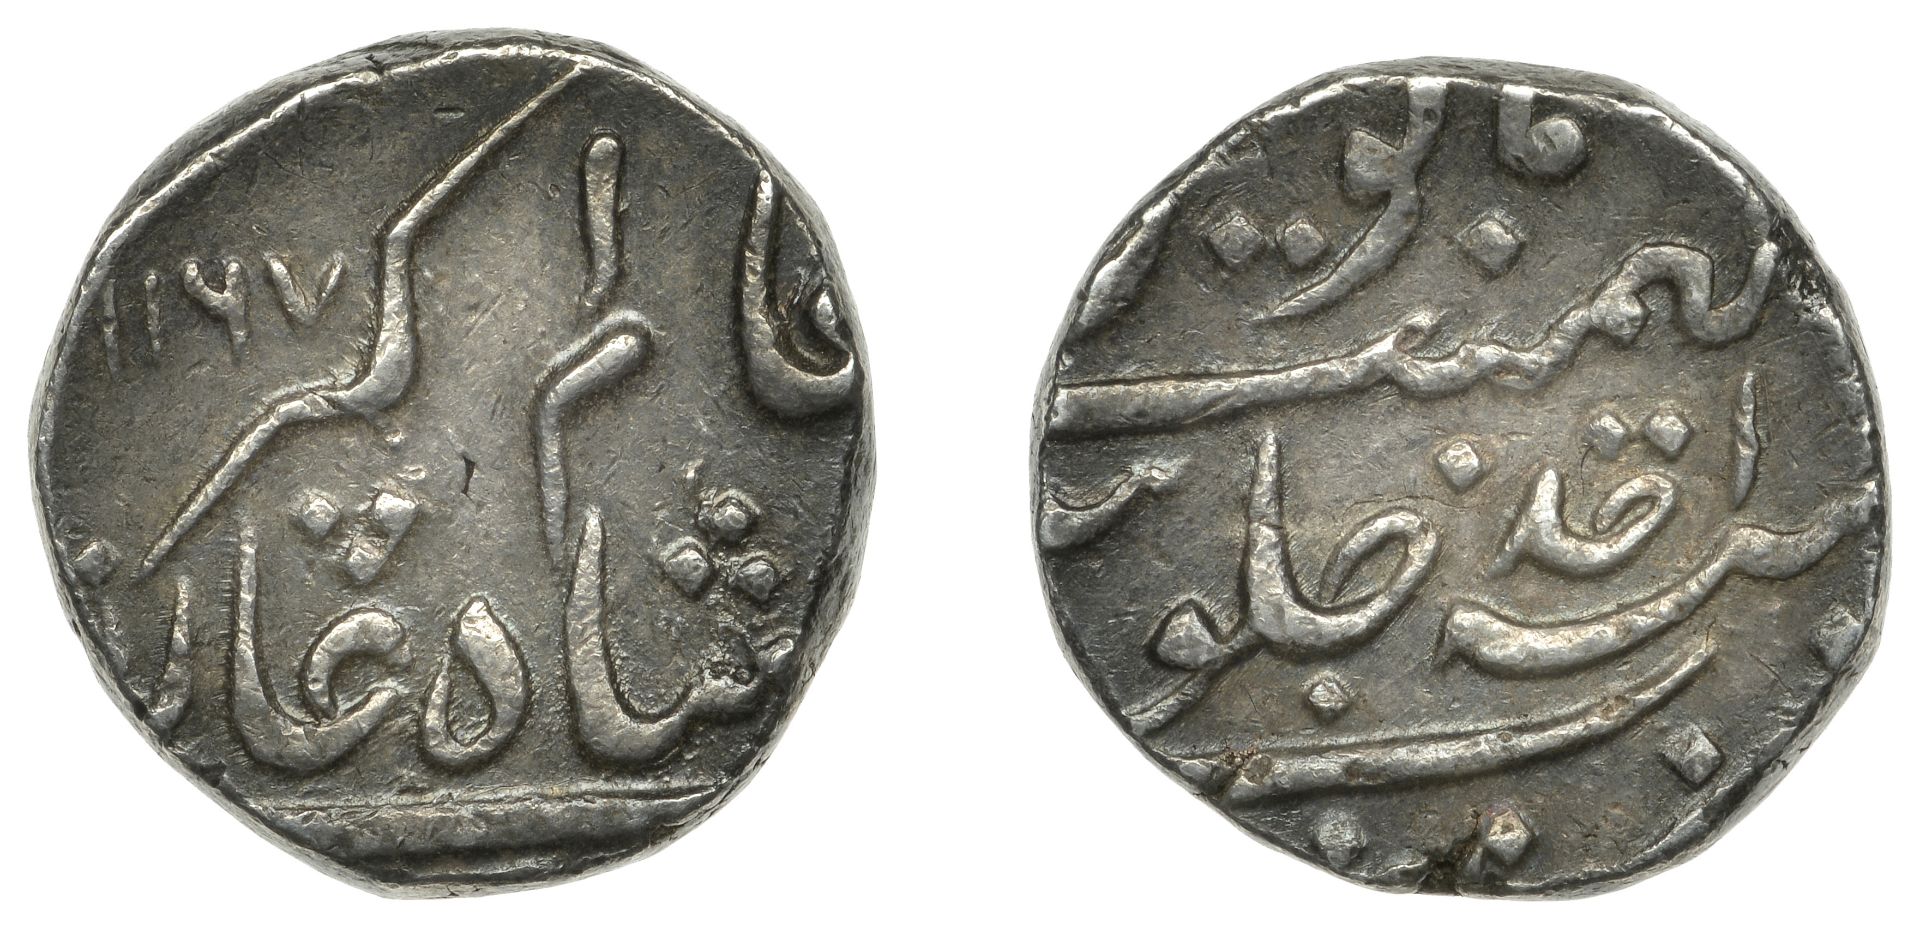 East India Company, Bombay Presidency, Early coinages: Mughal style, silver Rupee in the nam...